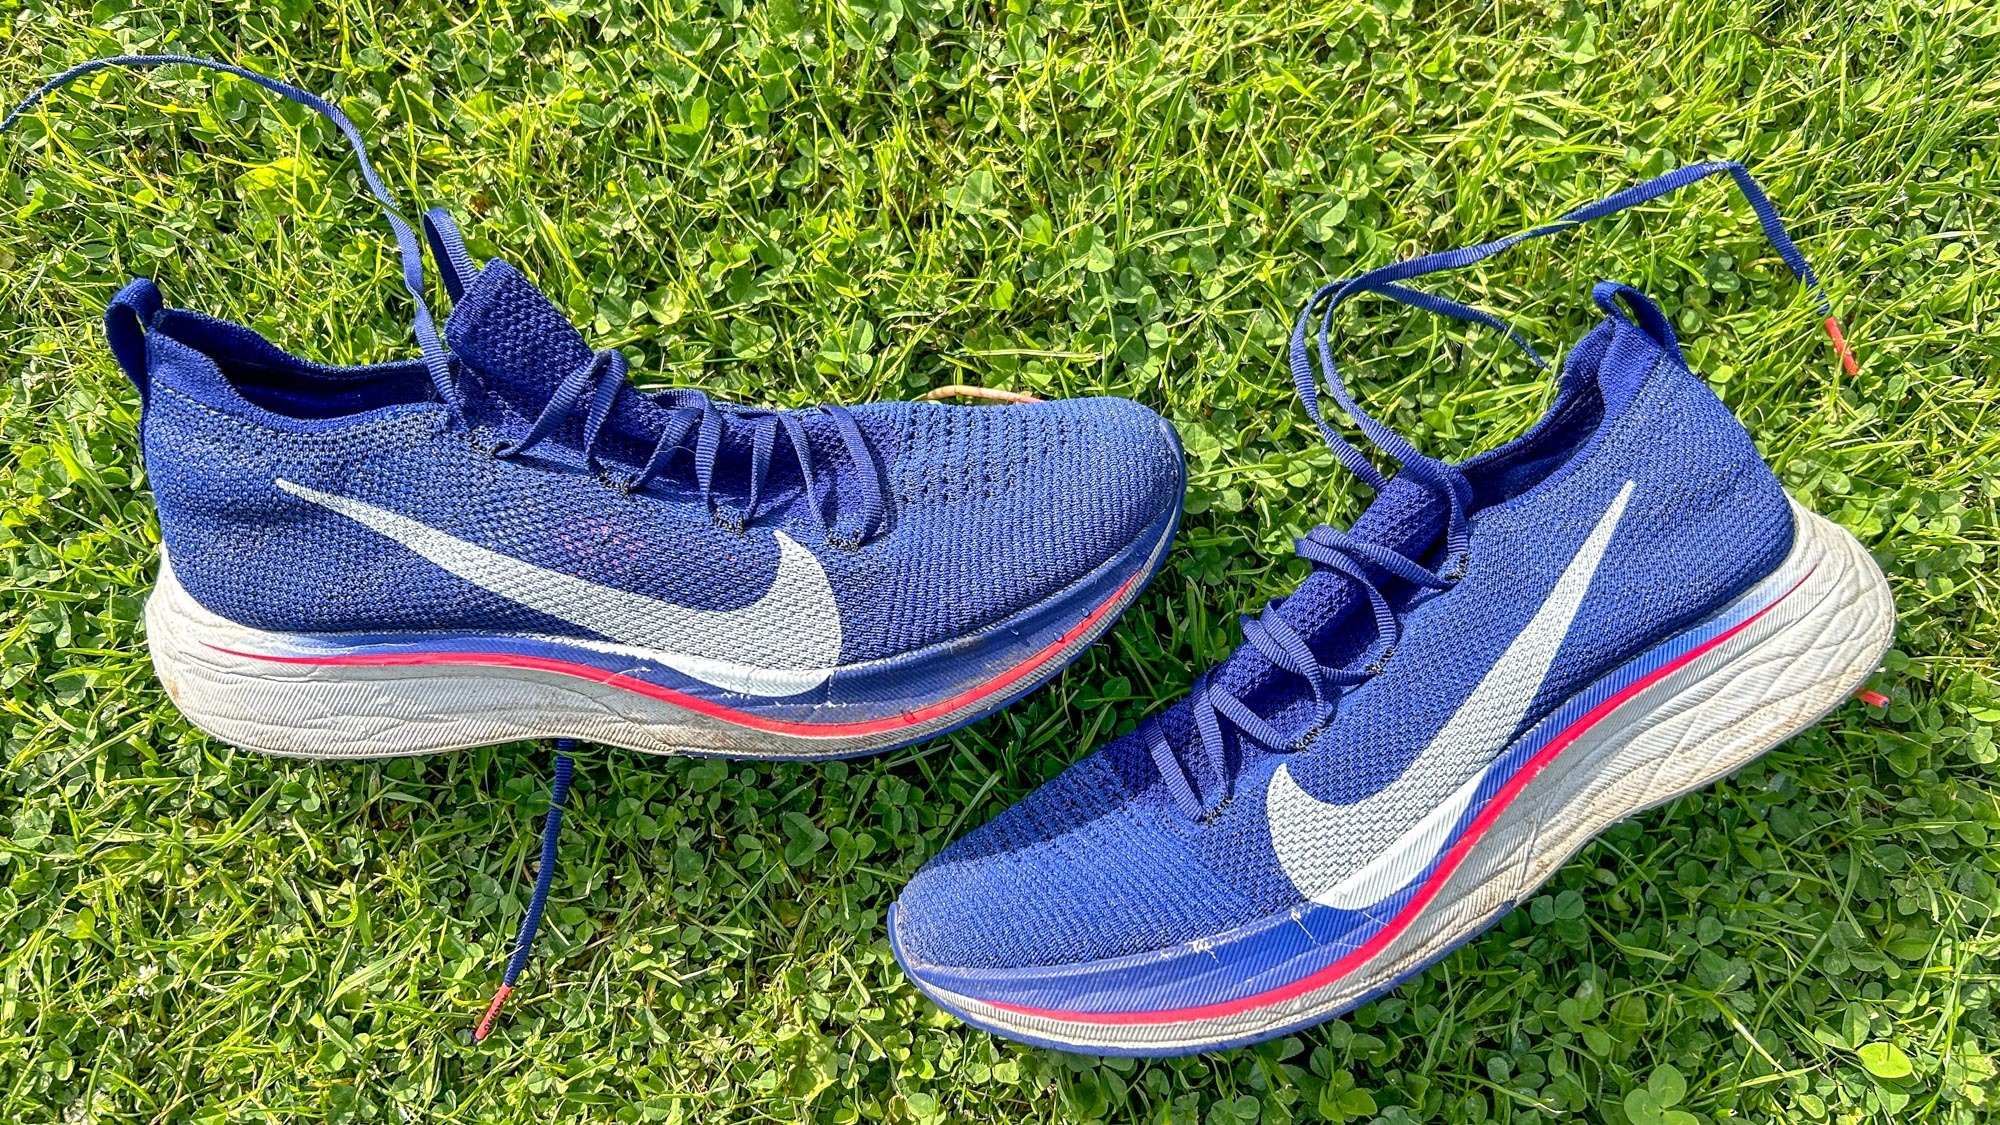 The Nike Vaporfly 4% running shoes on some grass